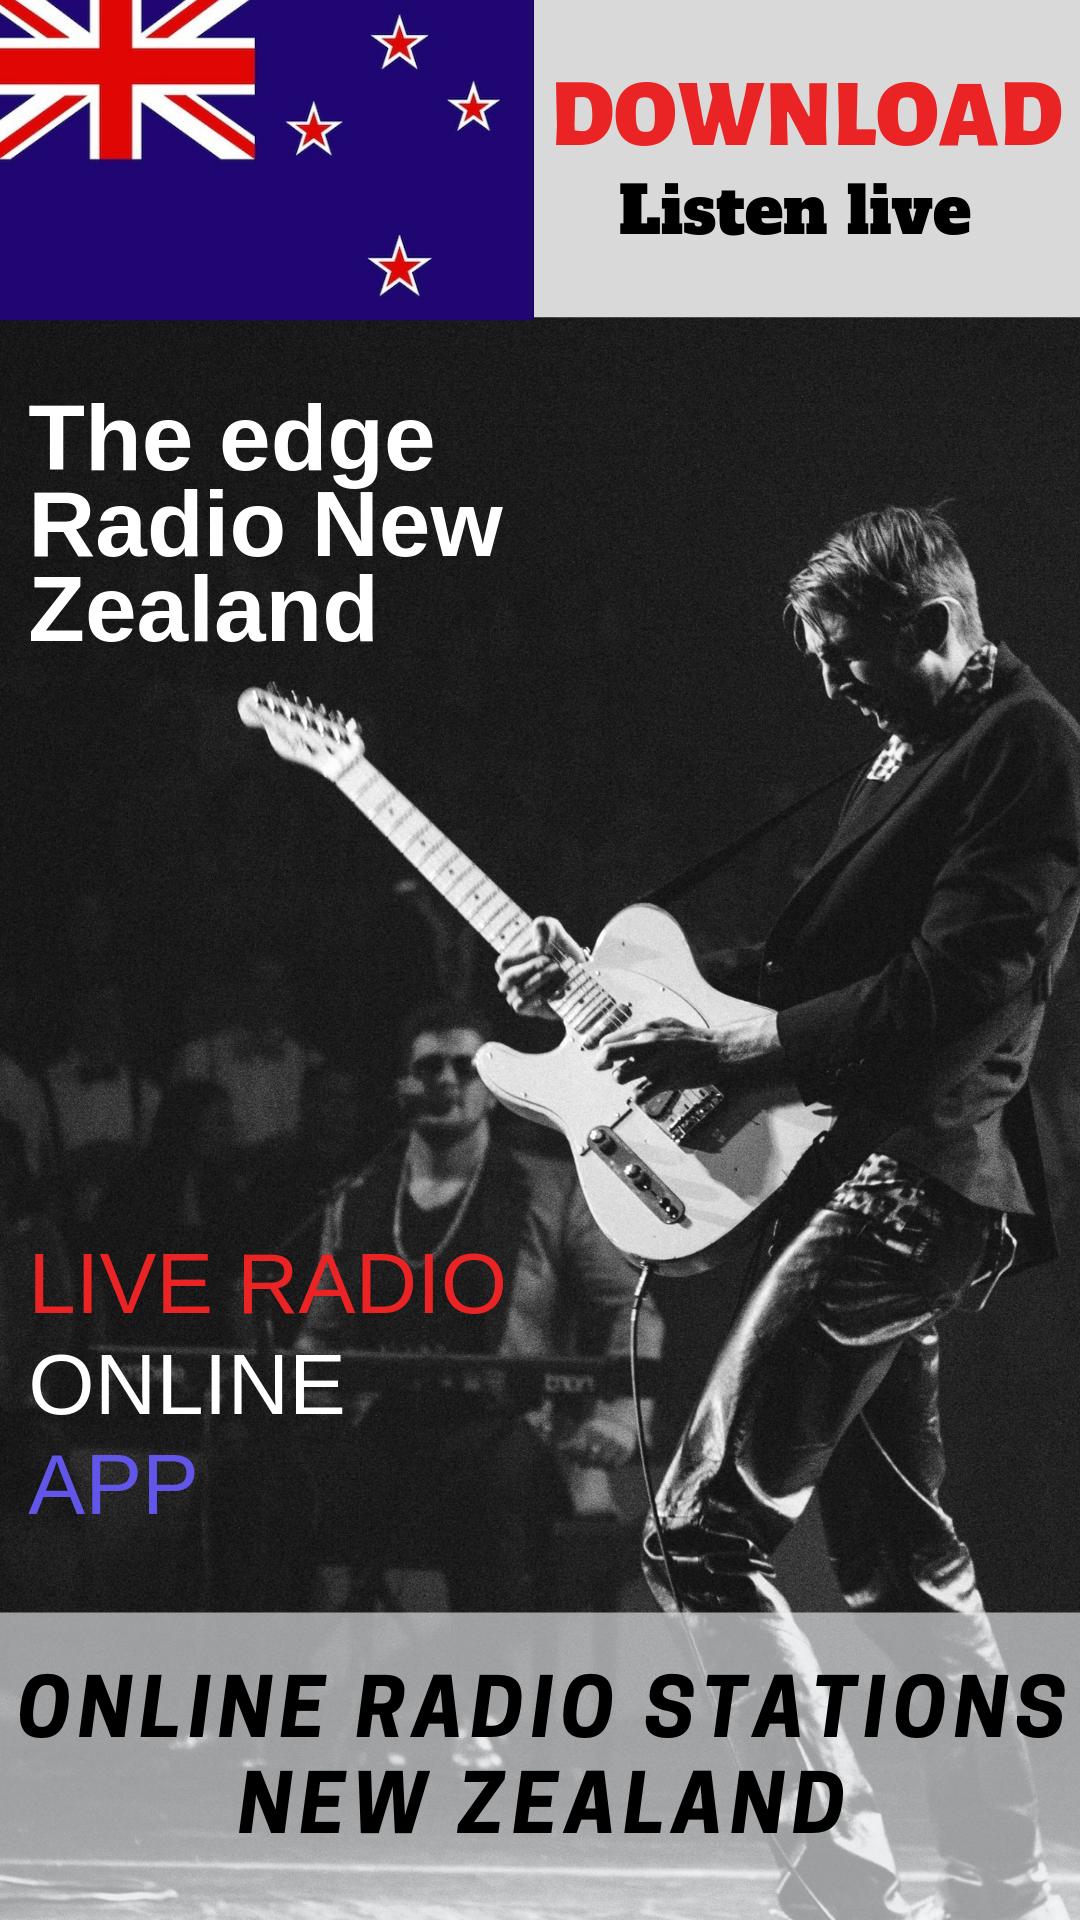 The edge Radio New Zealand Free Online for Android - APK Download